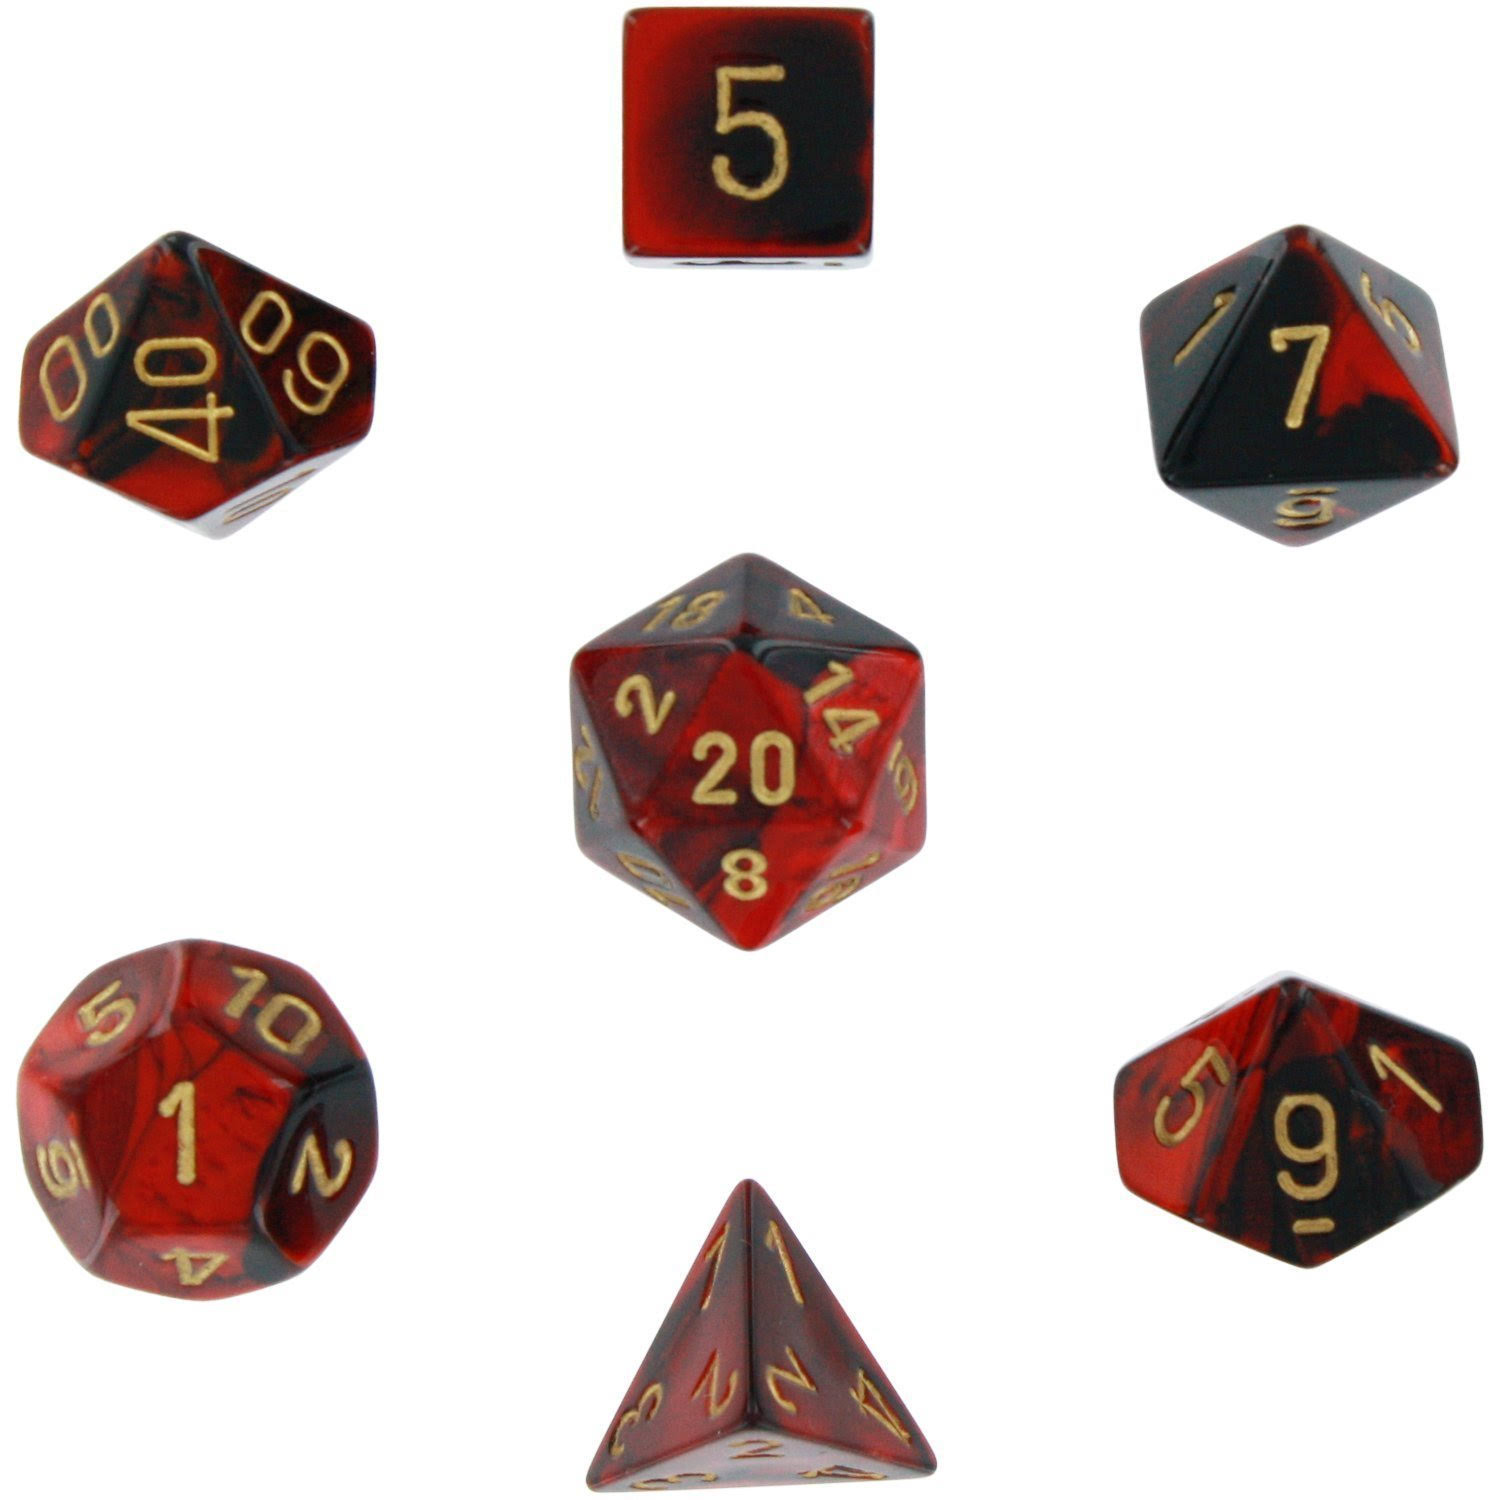 Chessex Gemini Polyhedral 7 Dice Set - Black & Red W Gold Numbers